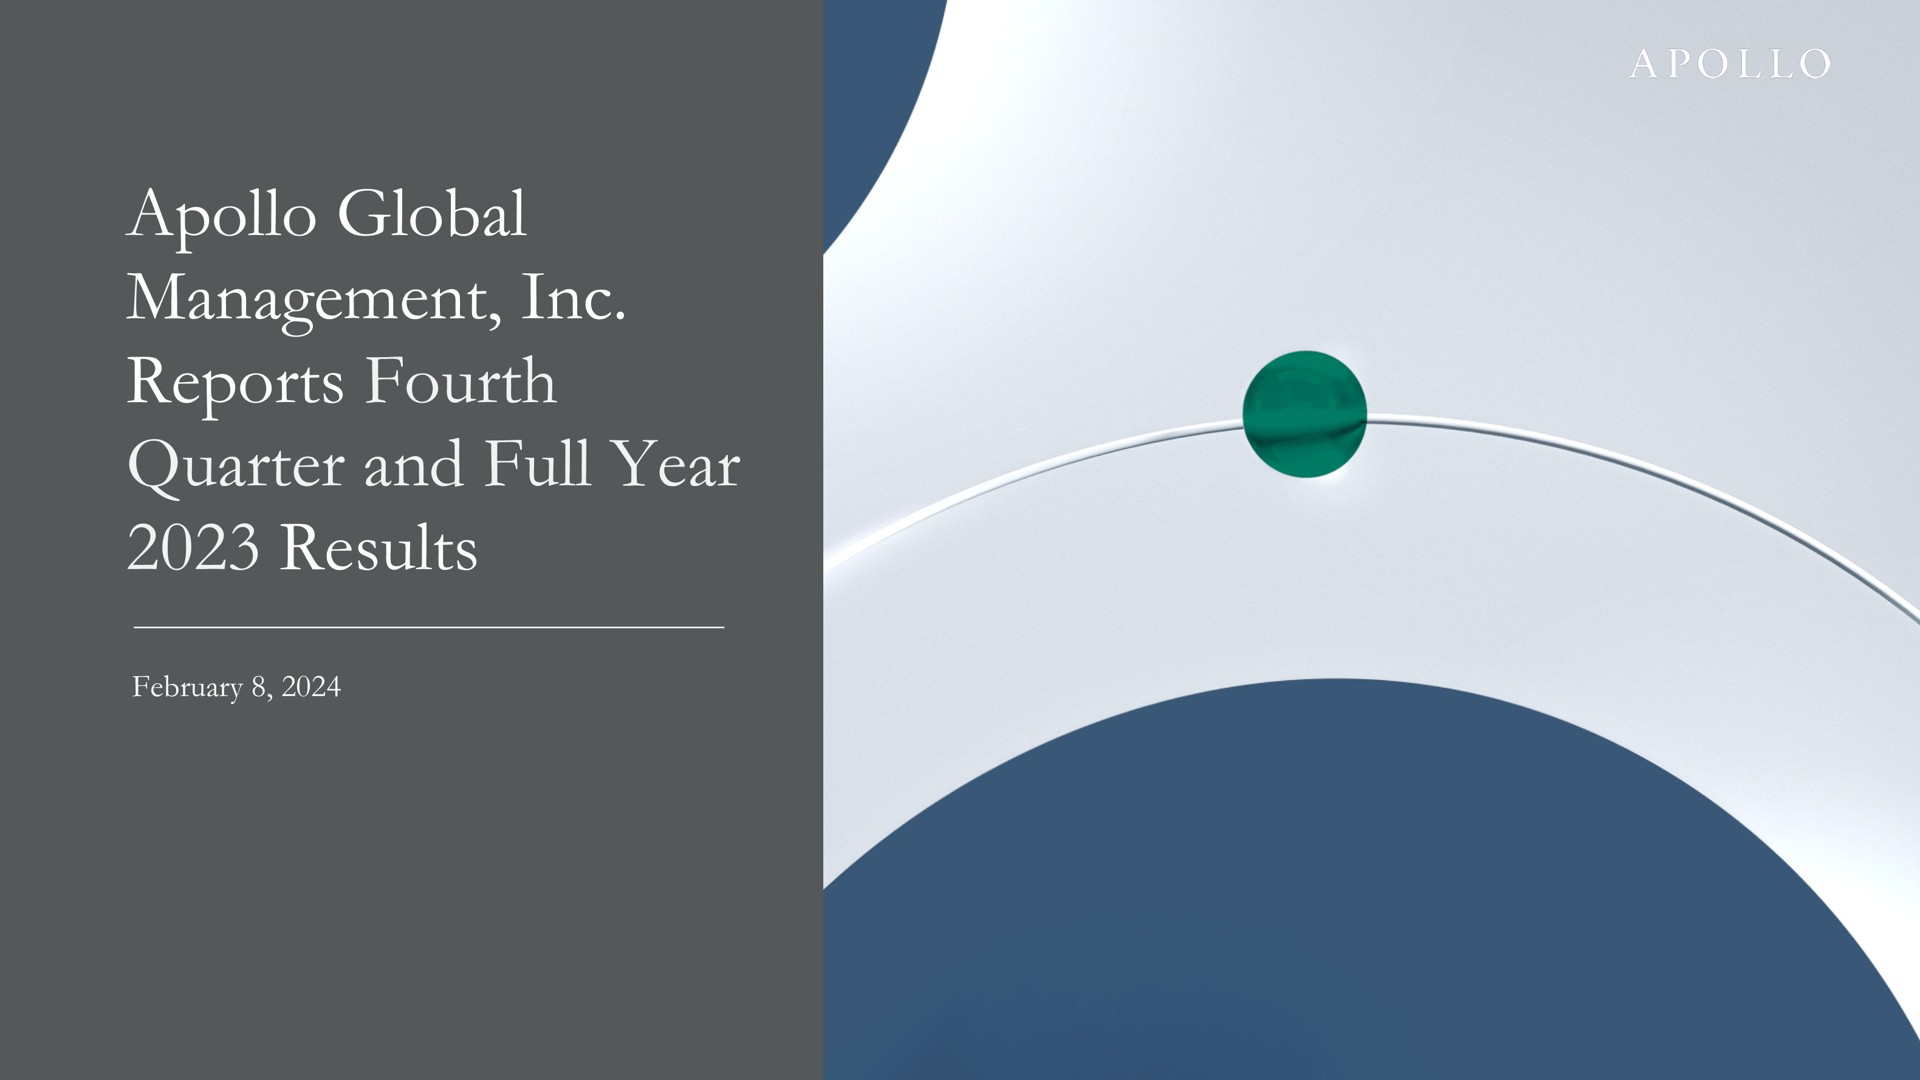 global management reports fourth quarter and full year results | Apollo Global Management